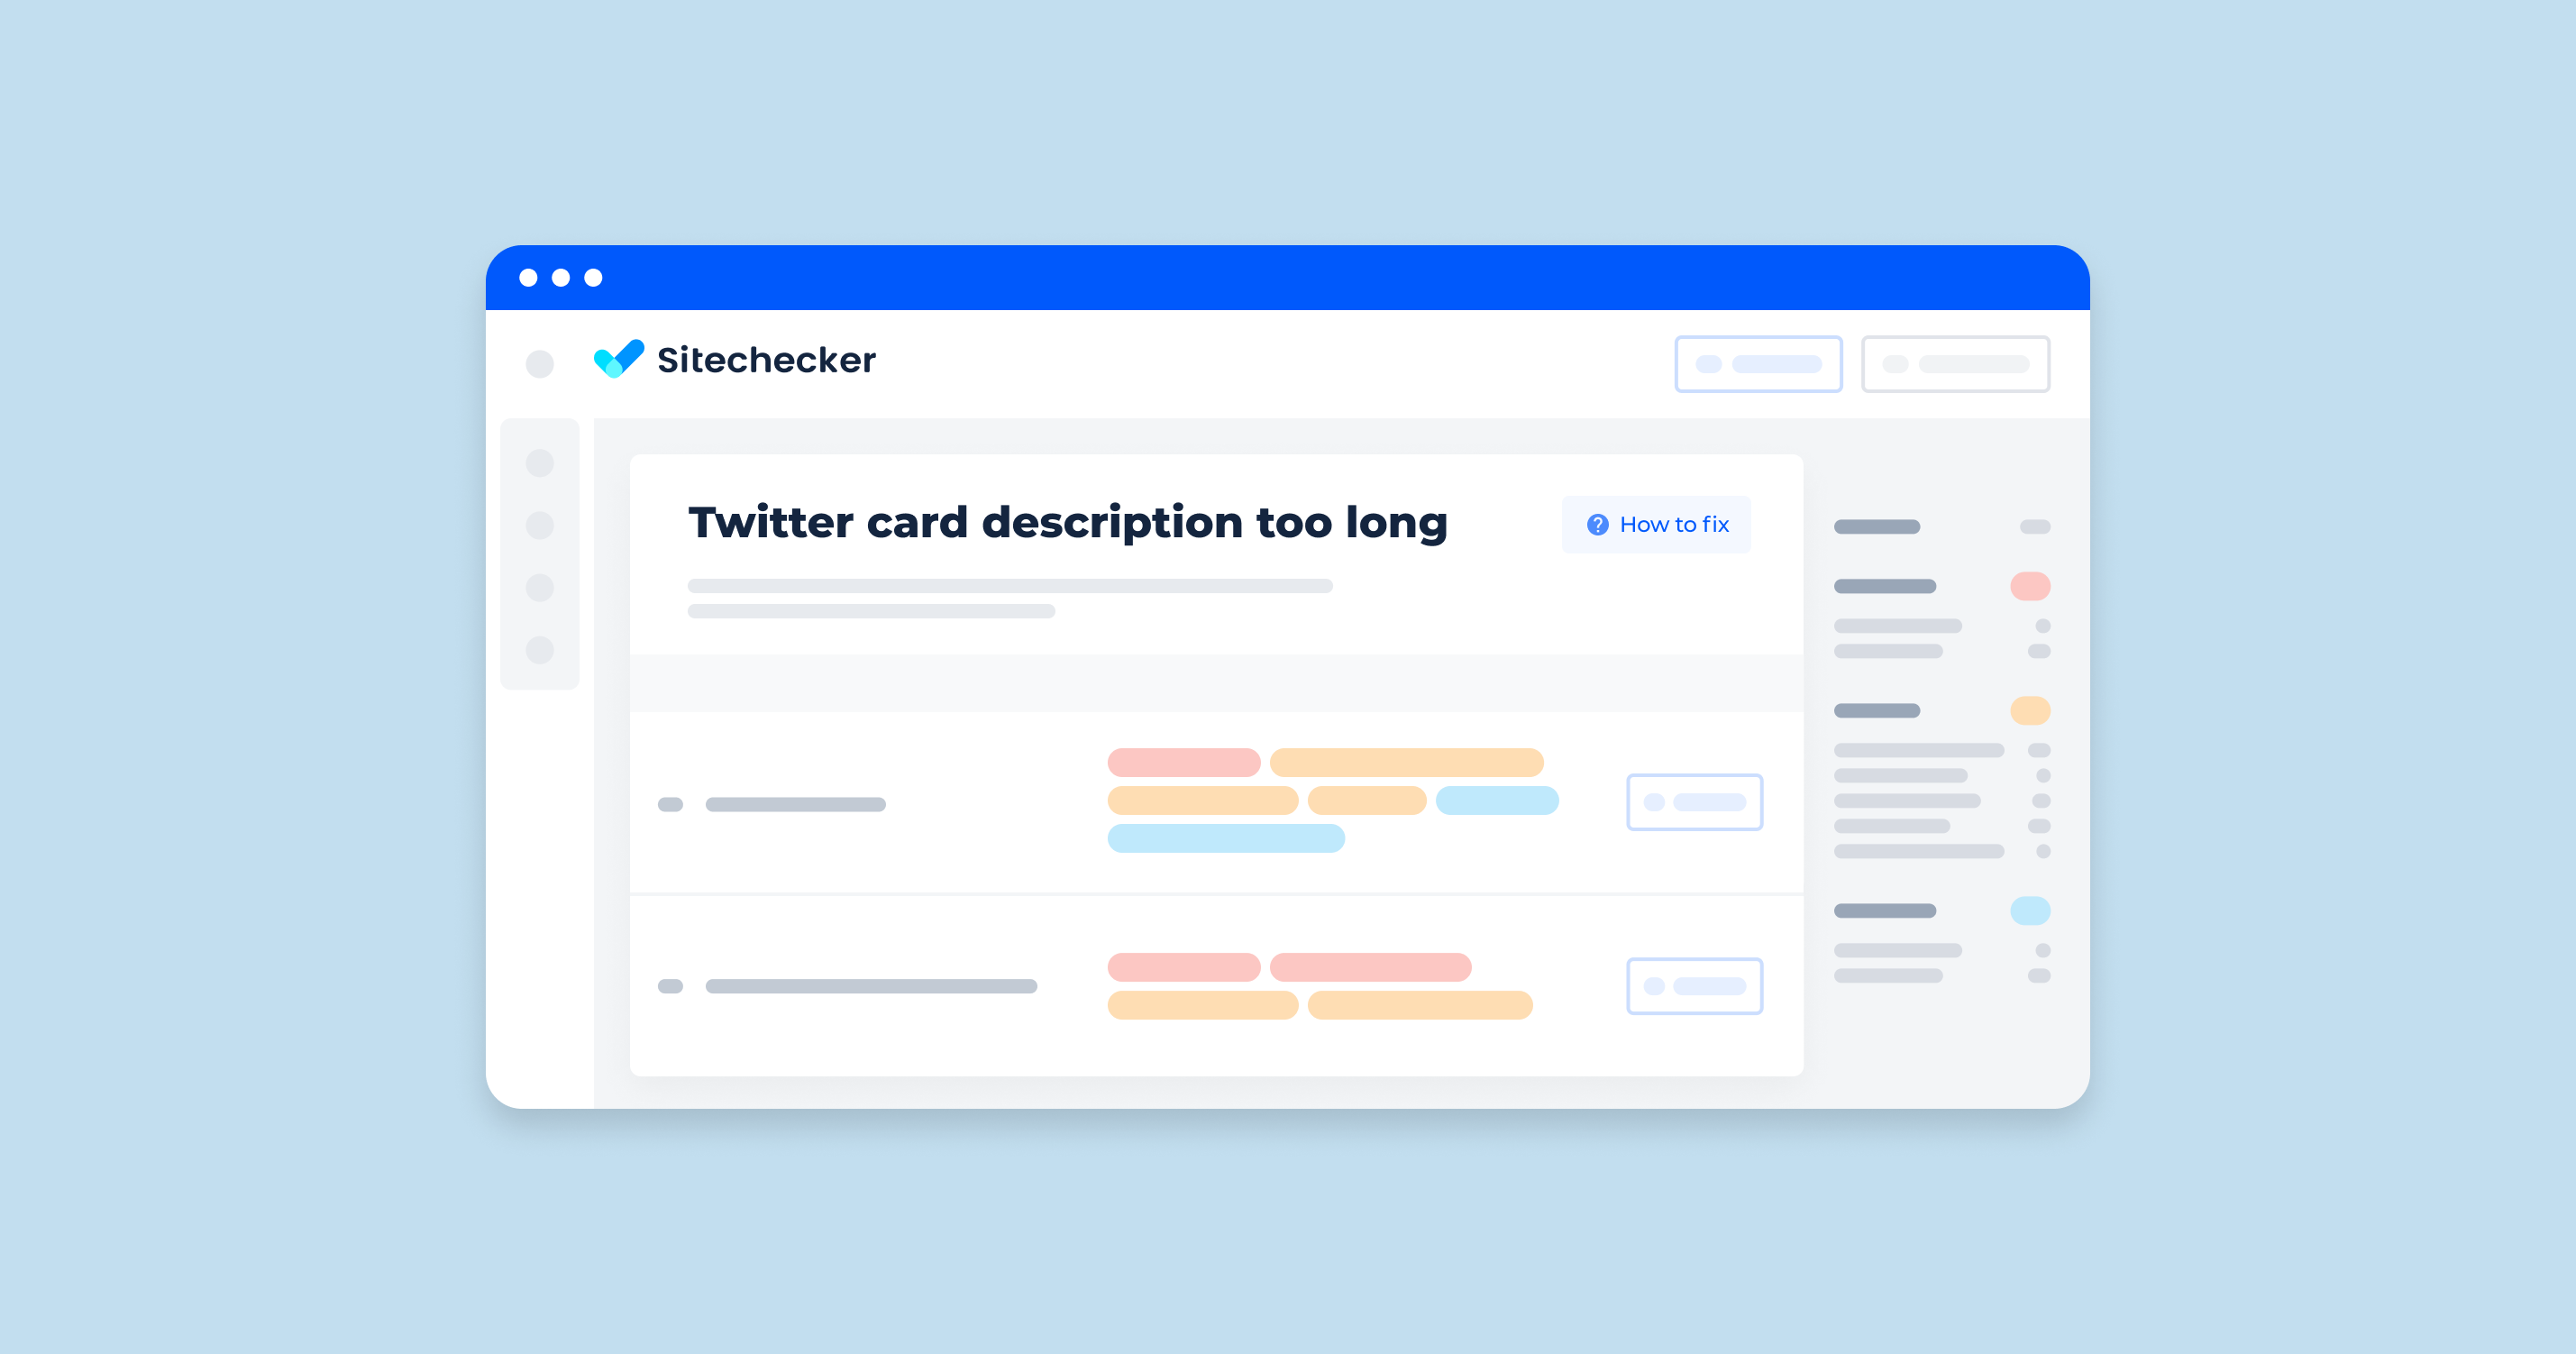 What To Do If Twitter Card Description Is Long